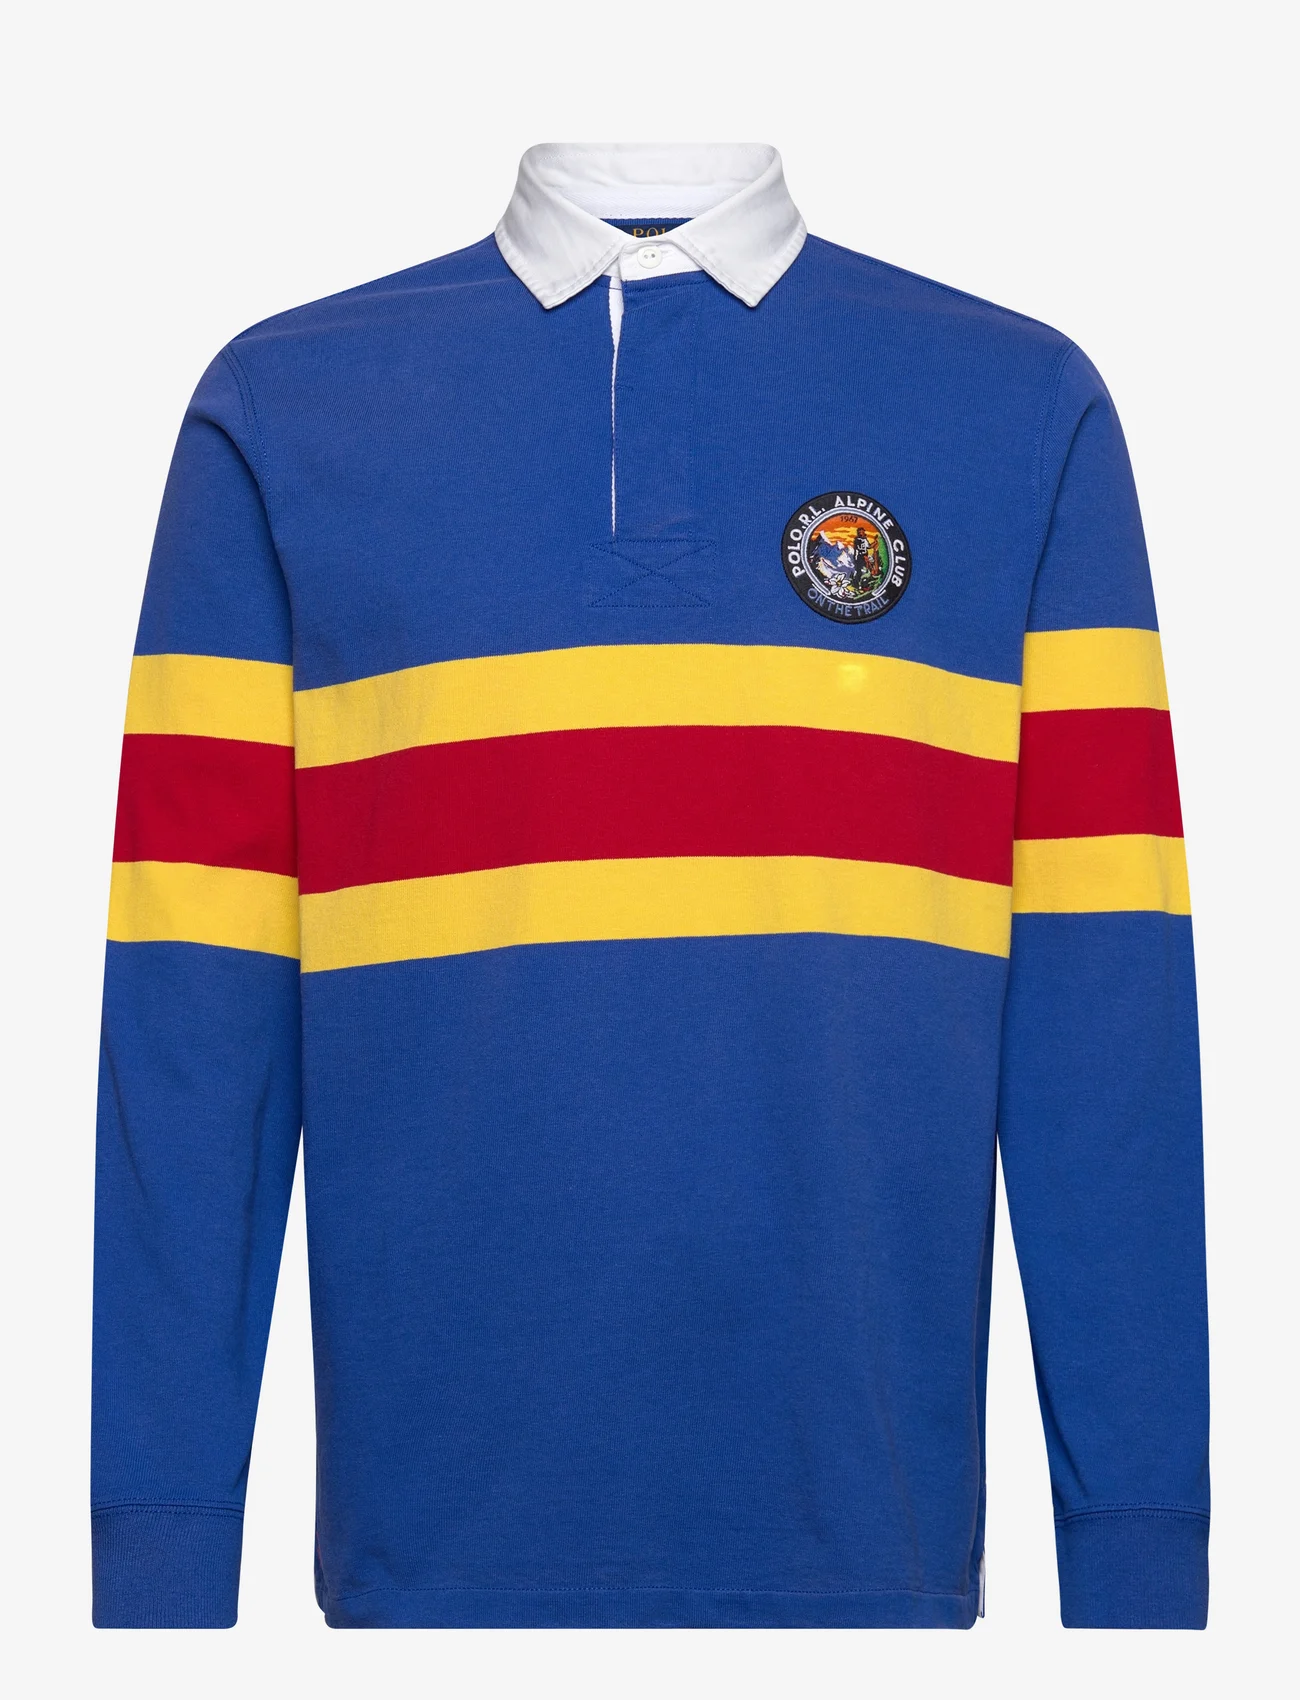 Polo Ralph Lauren - Classic Fit Striped Jersey Rugby Shirt - langermede - blue saturn multi - 0